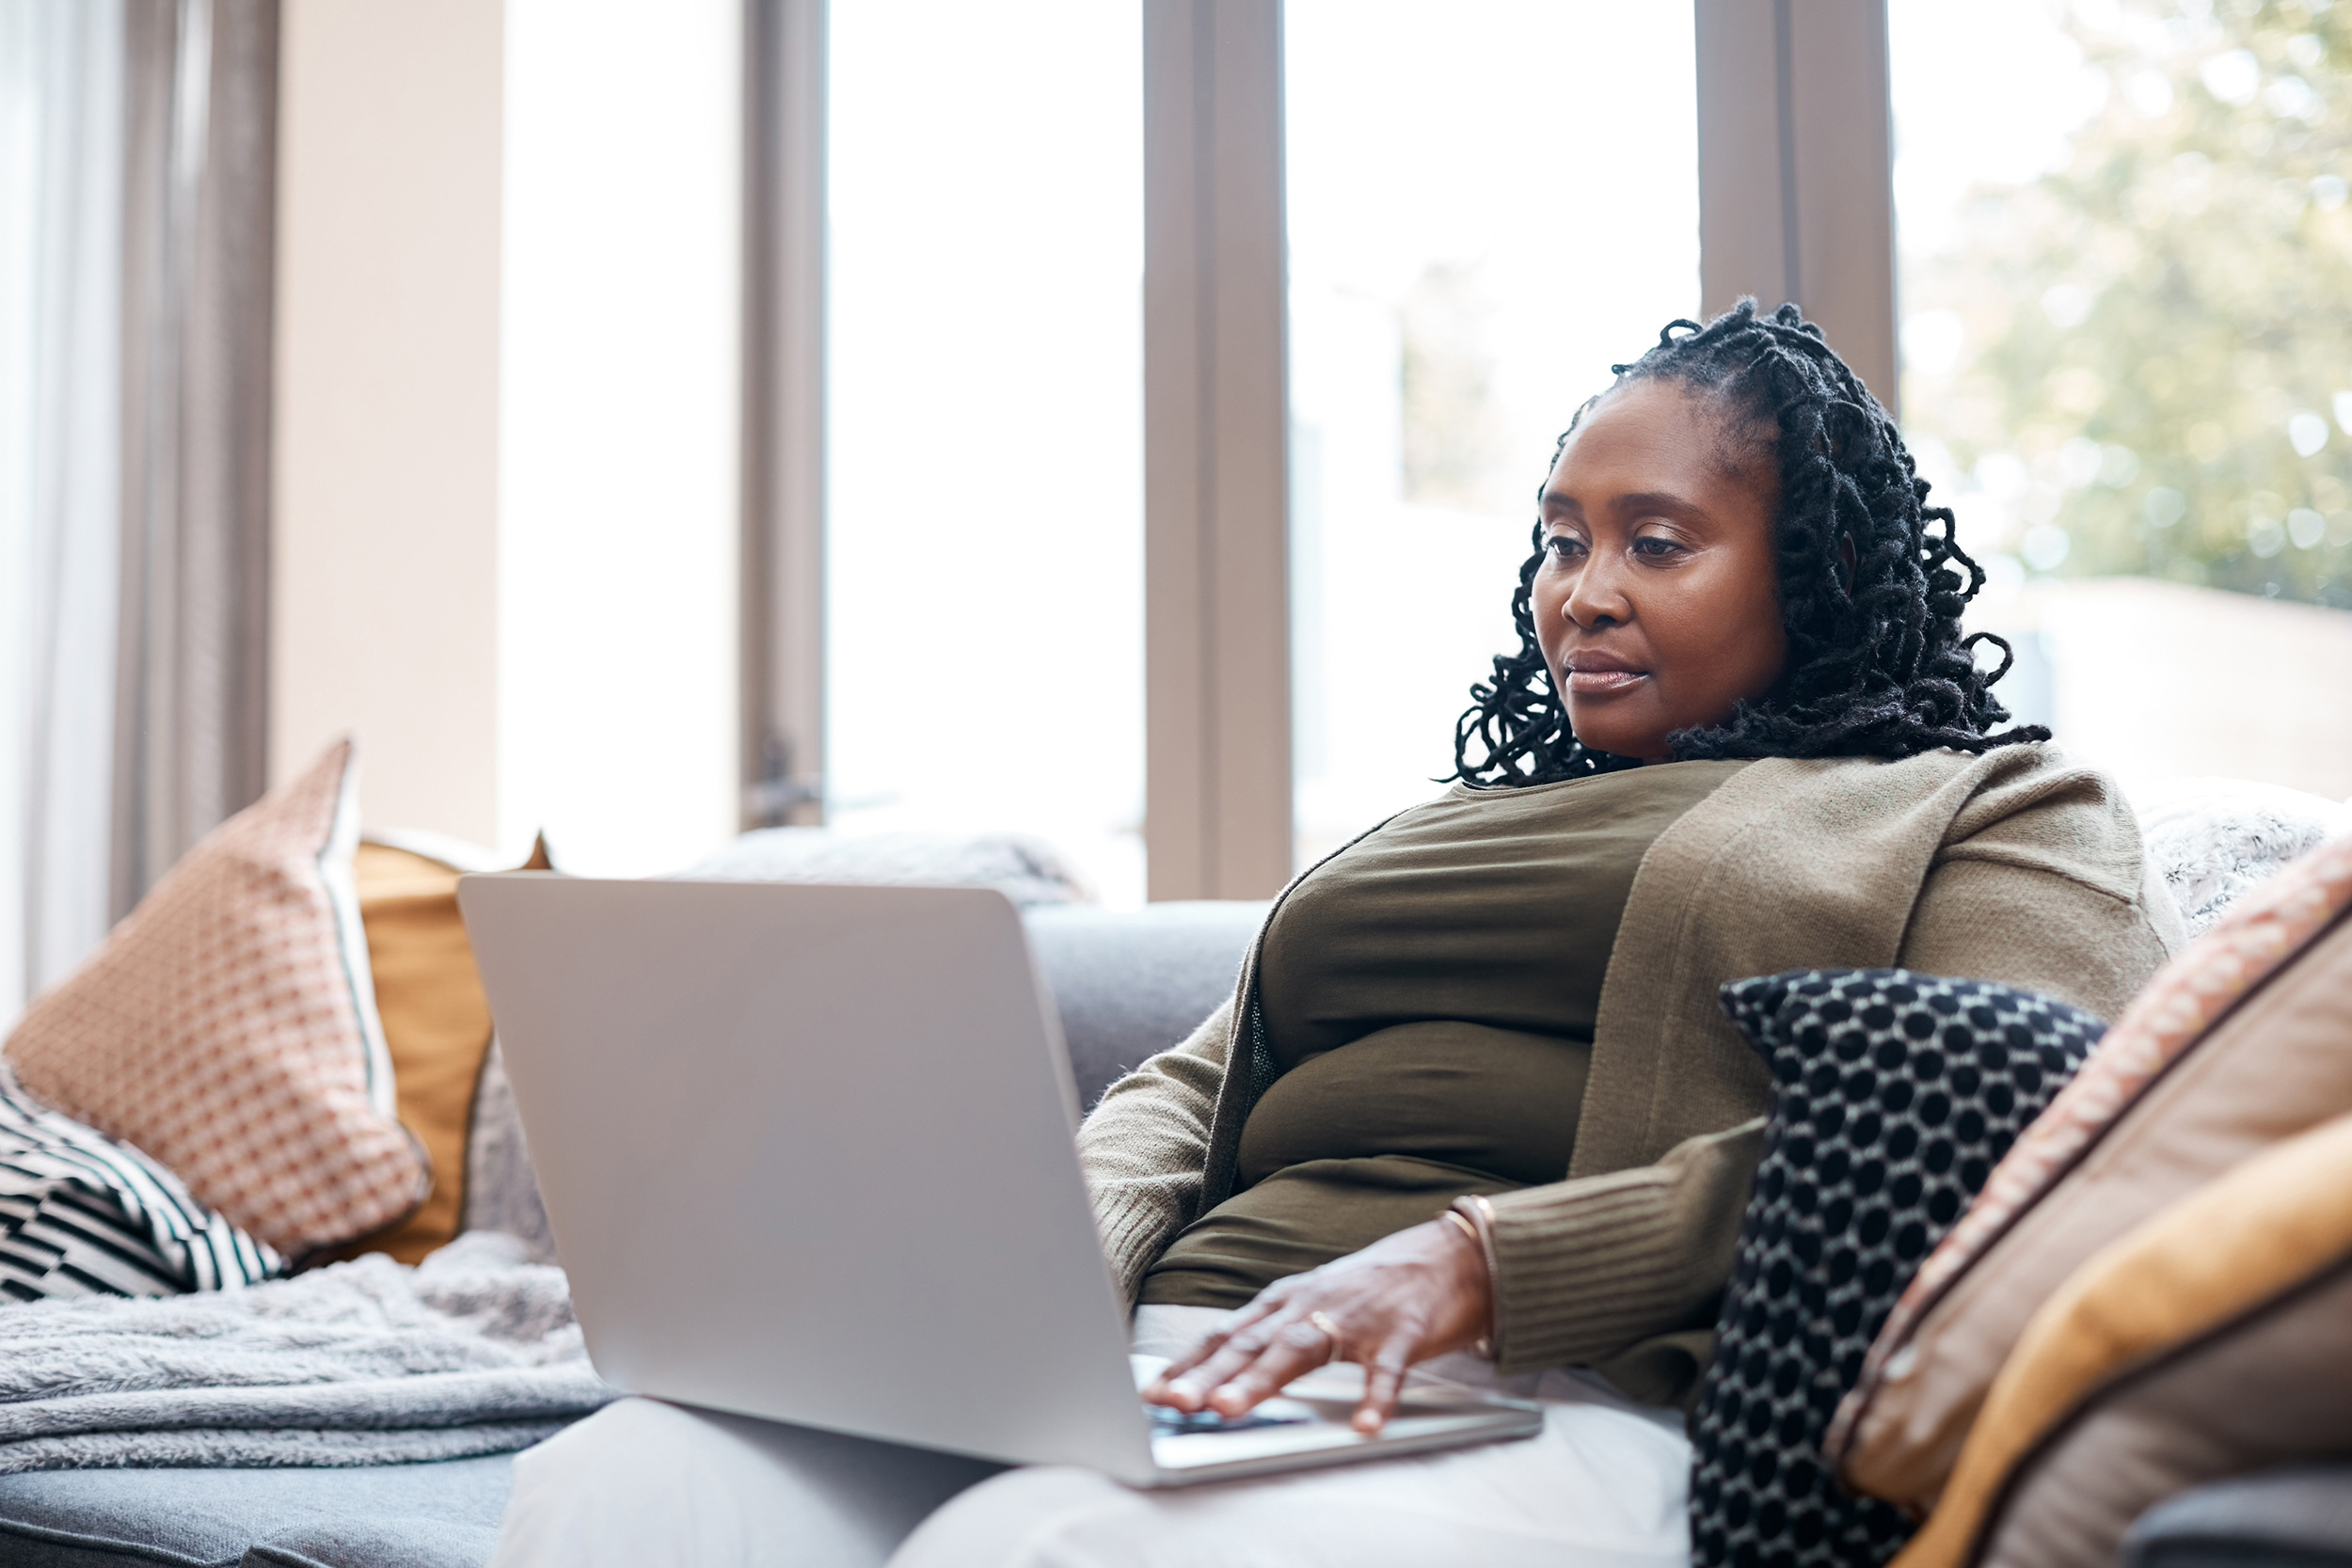 A woman reclines on a couch in front of a window, typing on her laptop. Troutman & Troutman disability lawyers answer questions about disability benefits every day.